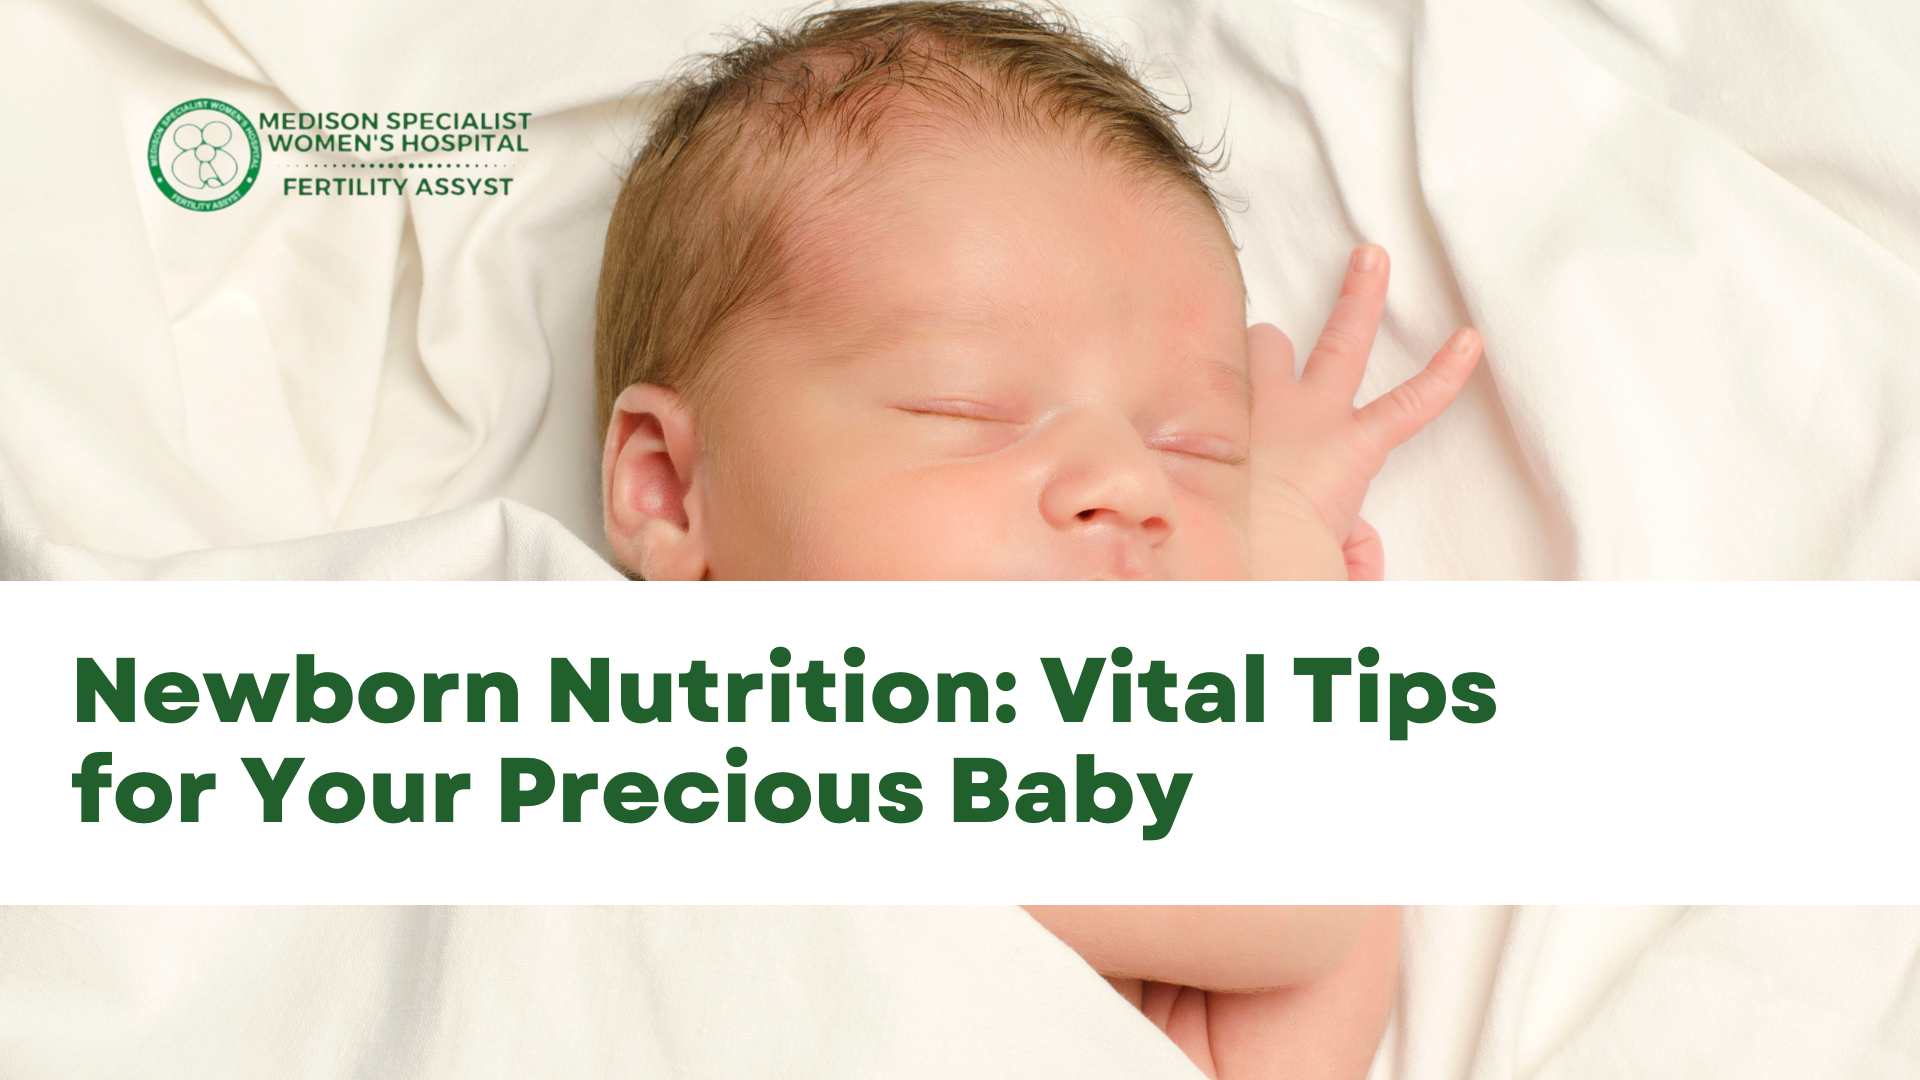 Newborn Nutrition: Vital Tips for Your Precious Baby